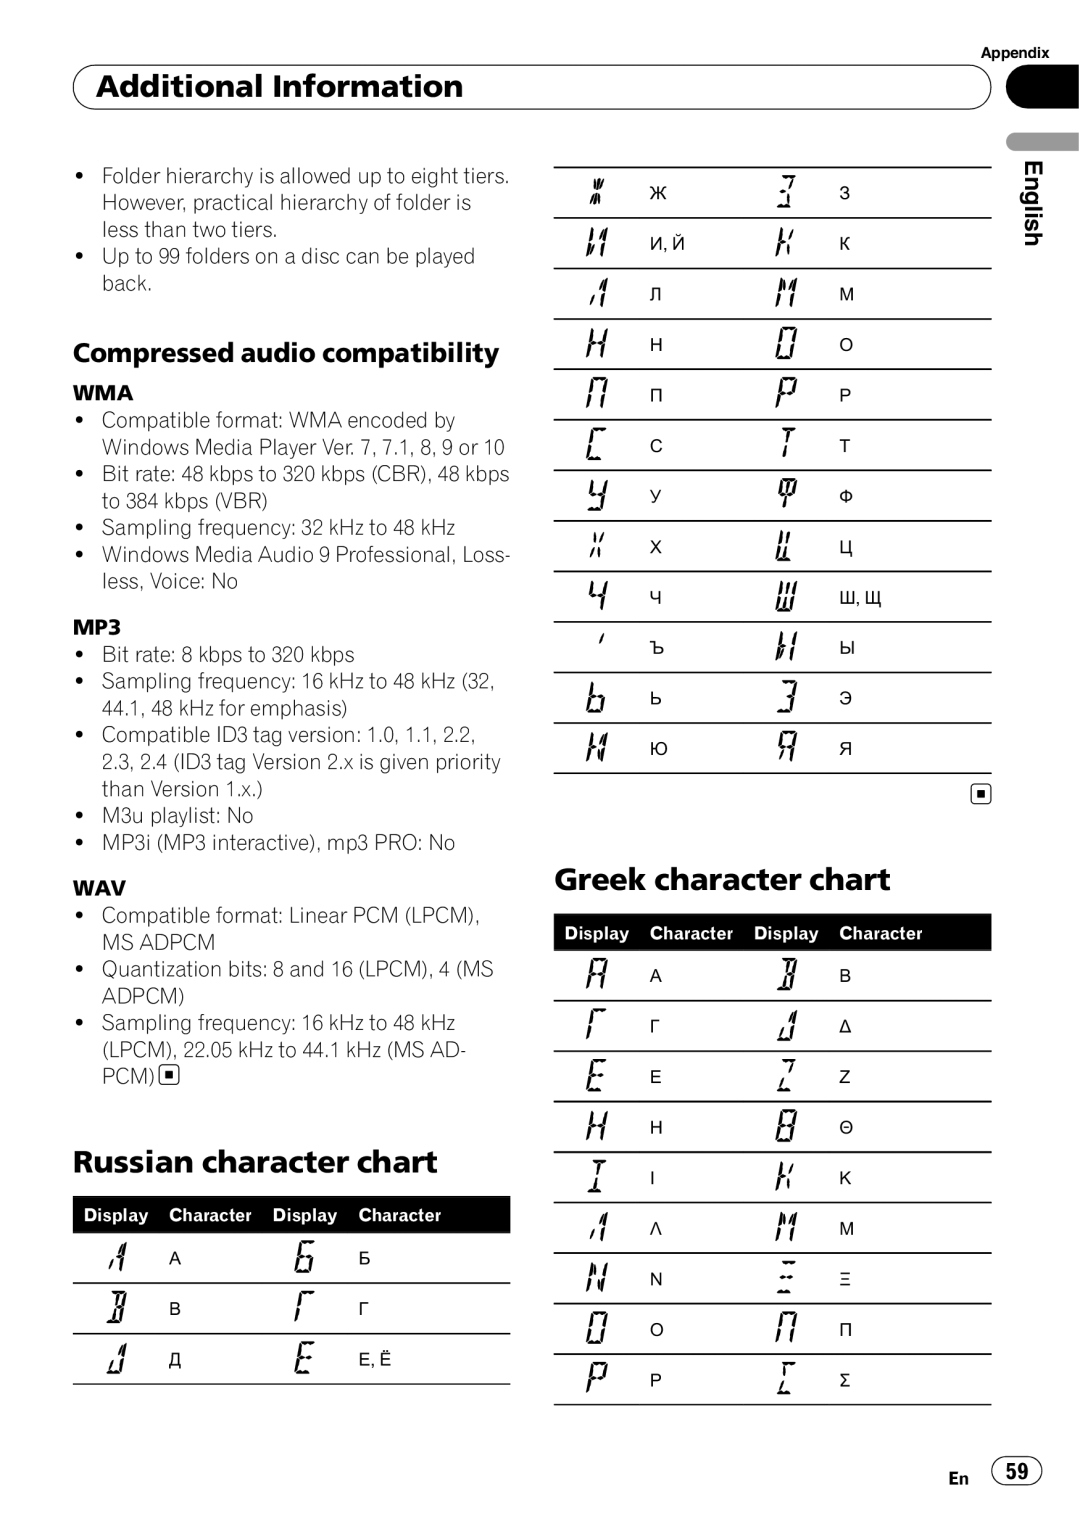 Pioneer DEH-P65BT Greek character chart, Russian character chart, Compressed audio compatibility, Additional Information 